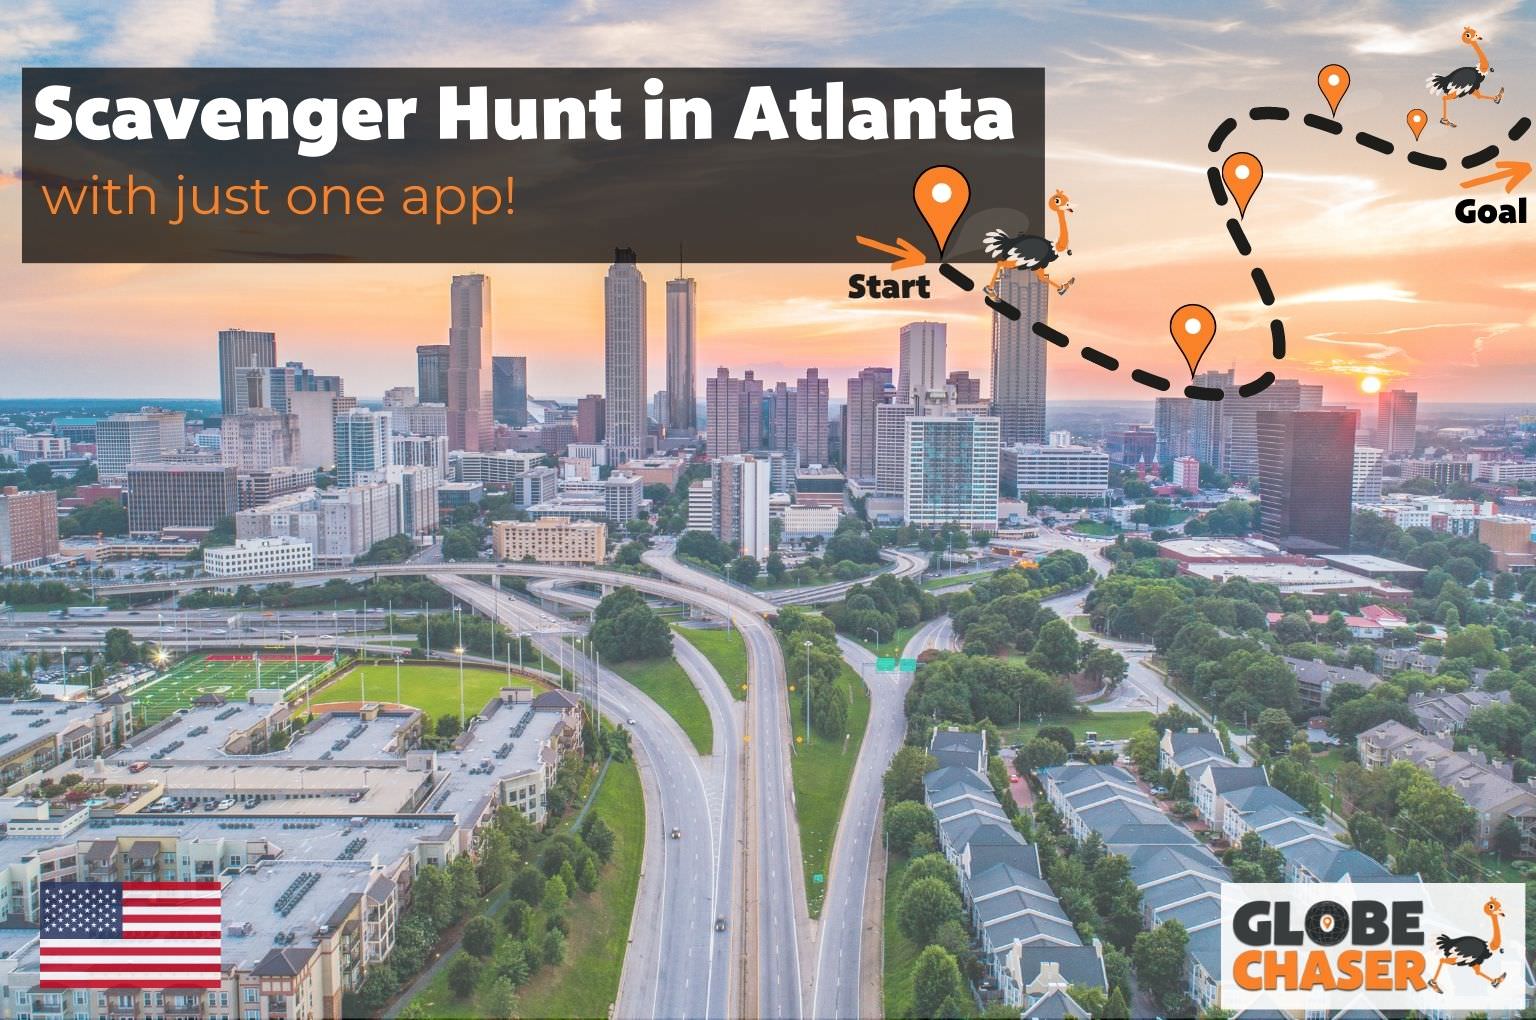 Scavenger Hunt in Atlanta, USA - Family Activities with the Globe Chaser App for Outdoor Fun